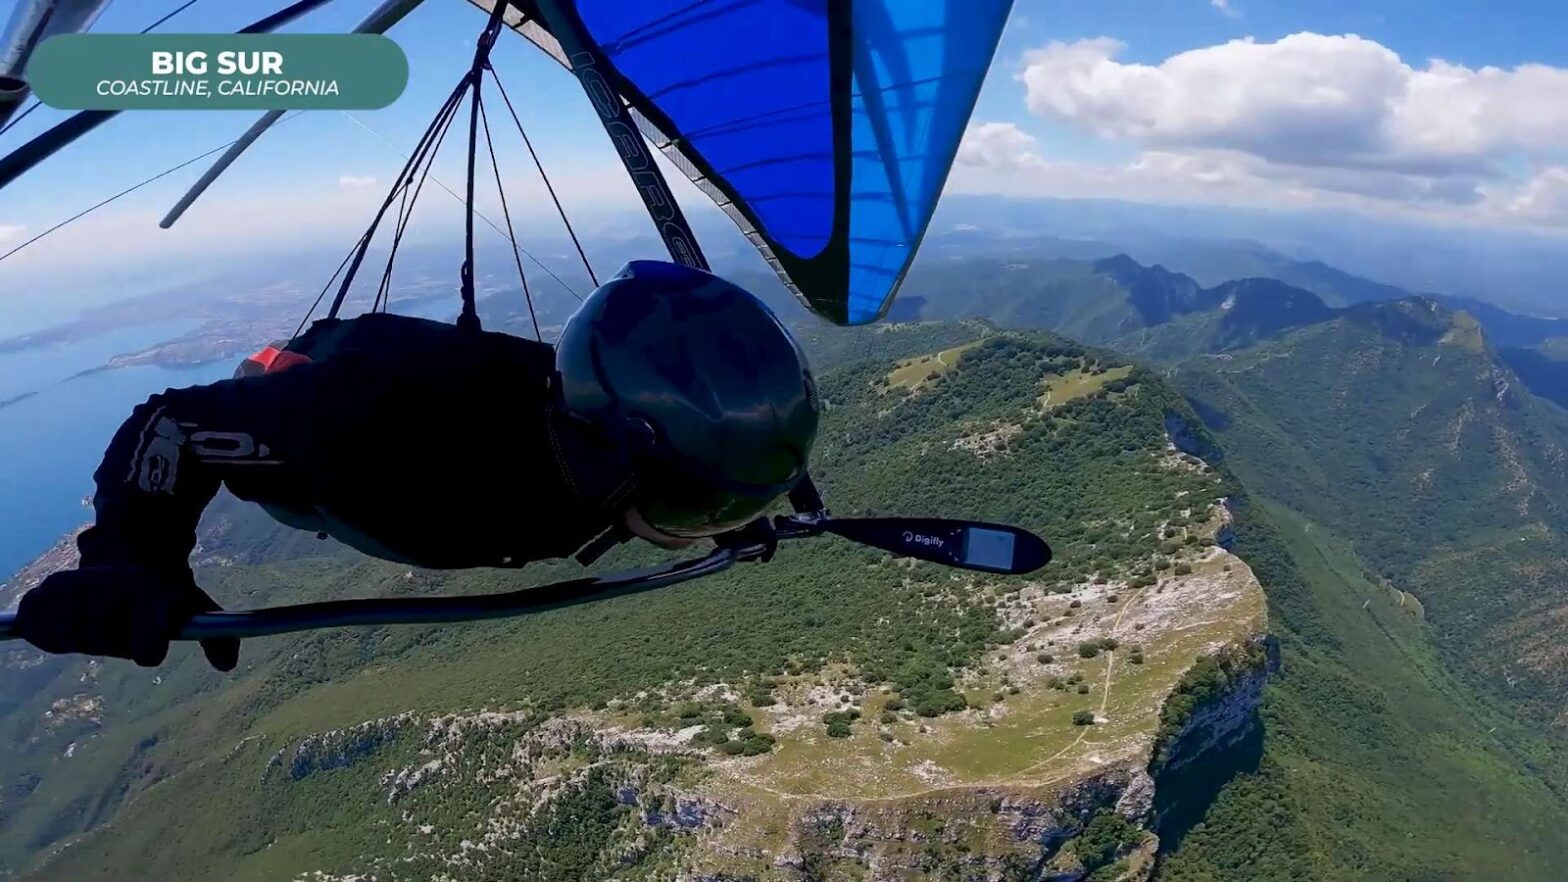 Human flying on a hang glider near mountains